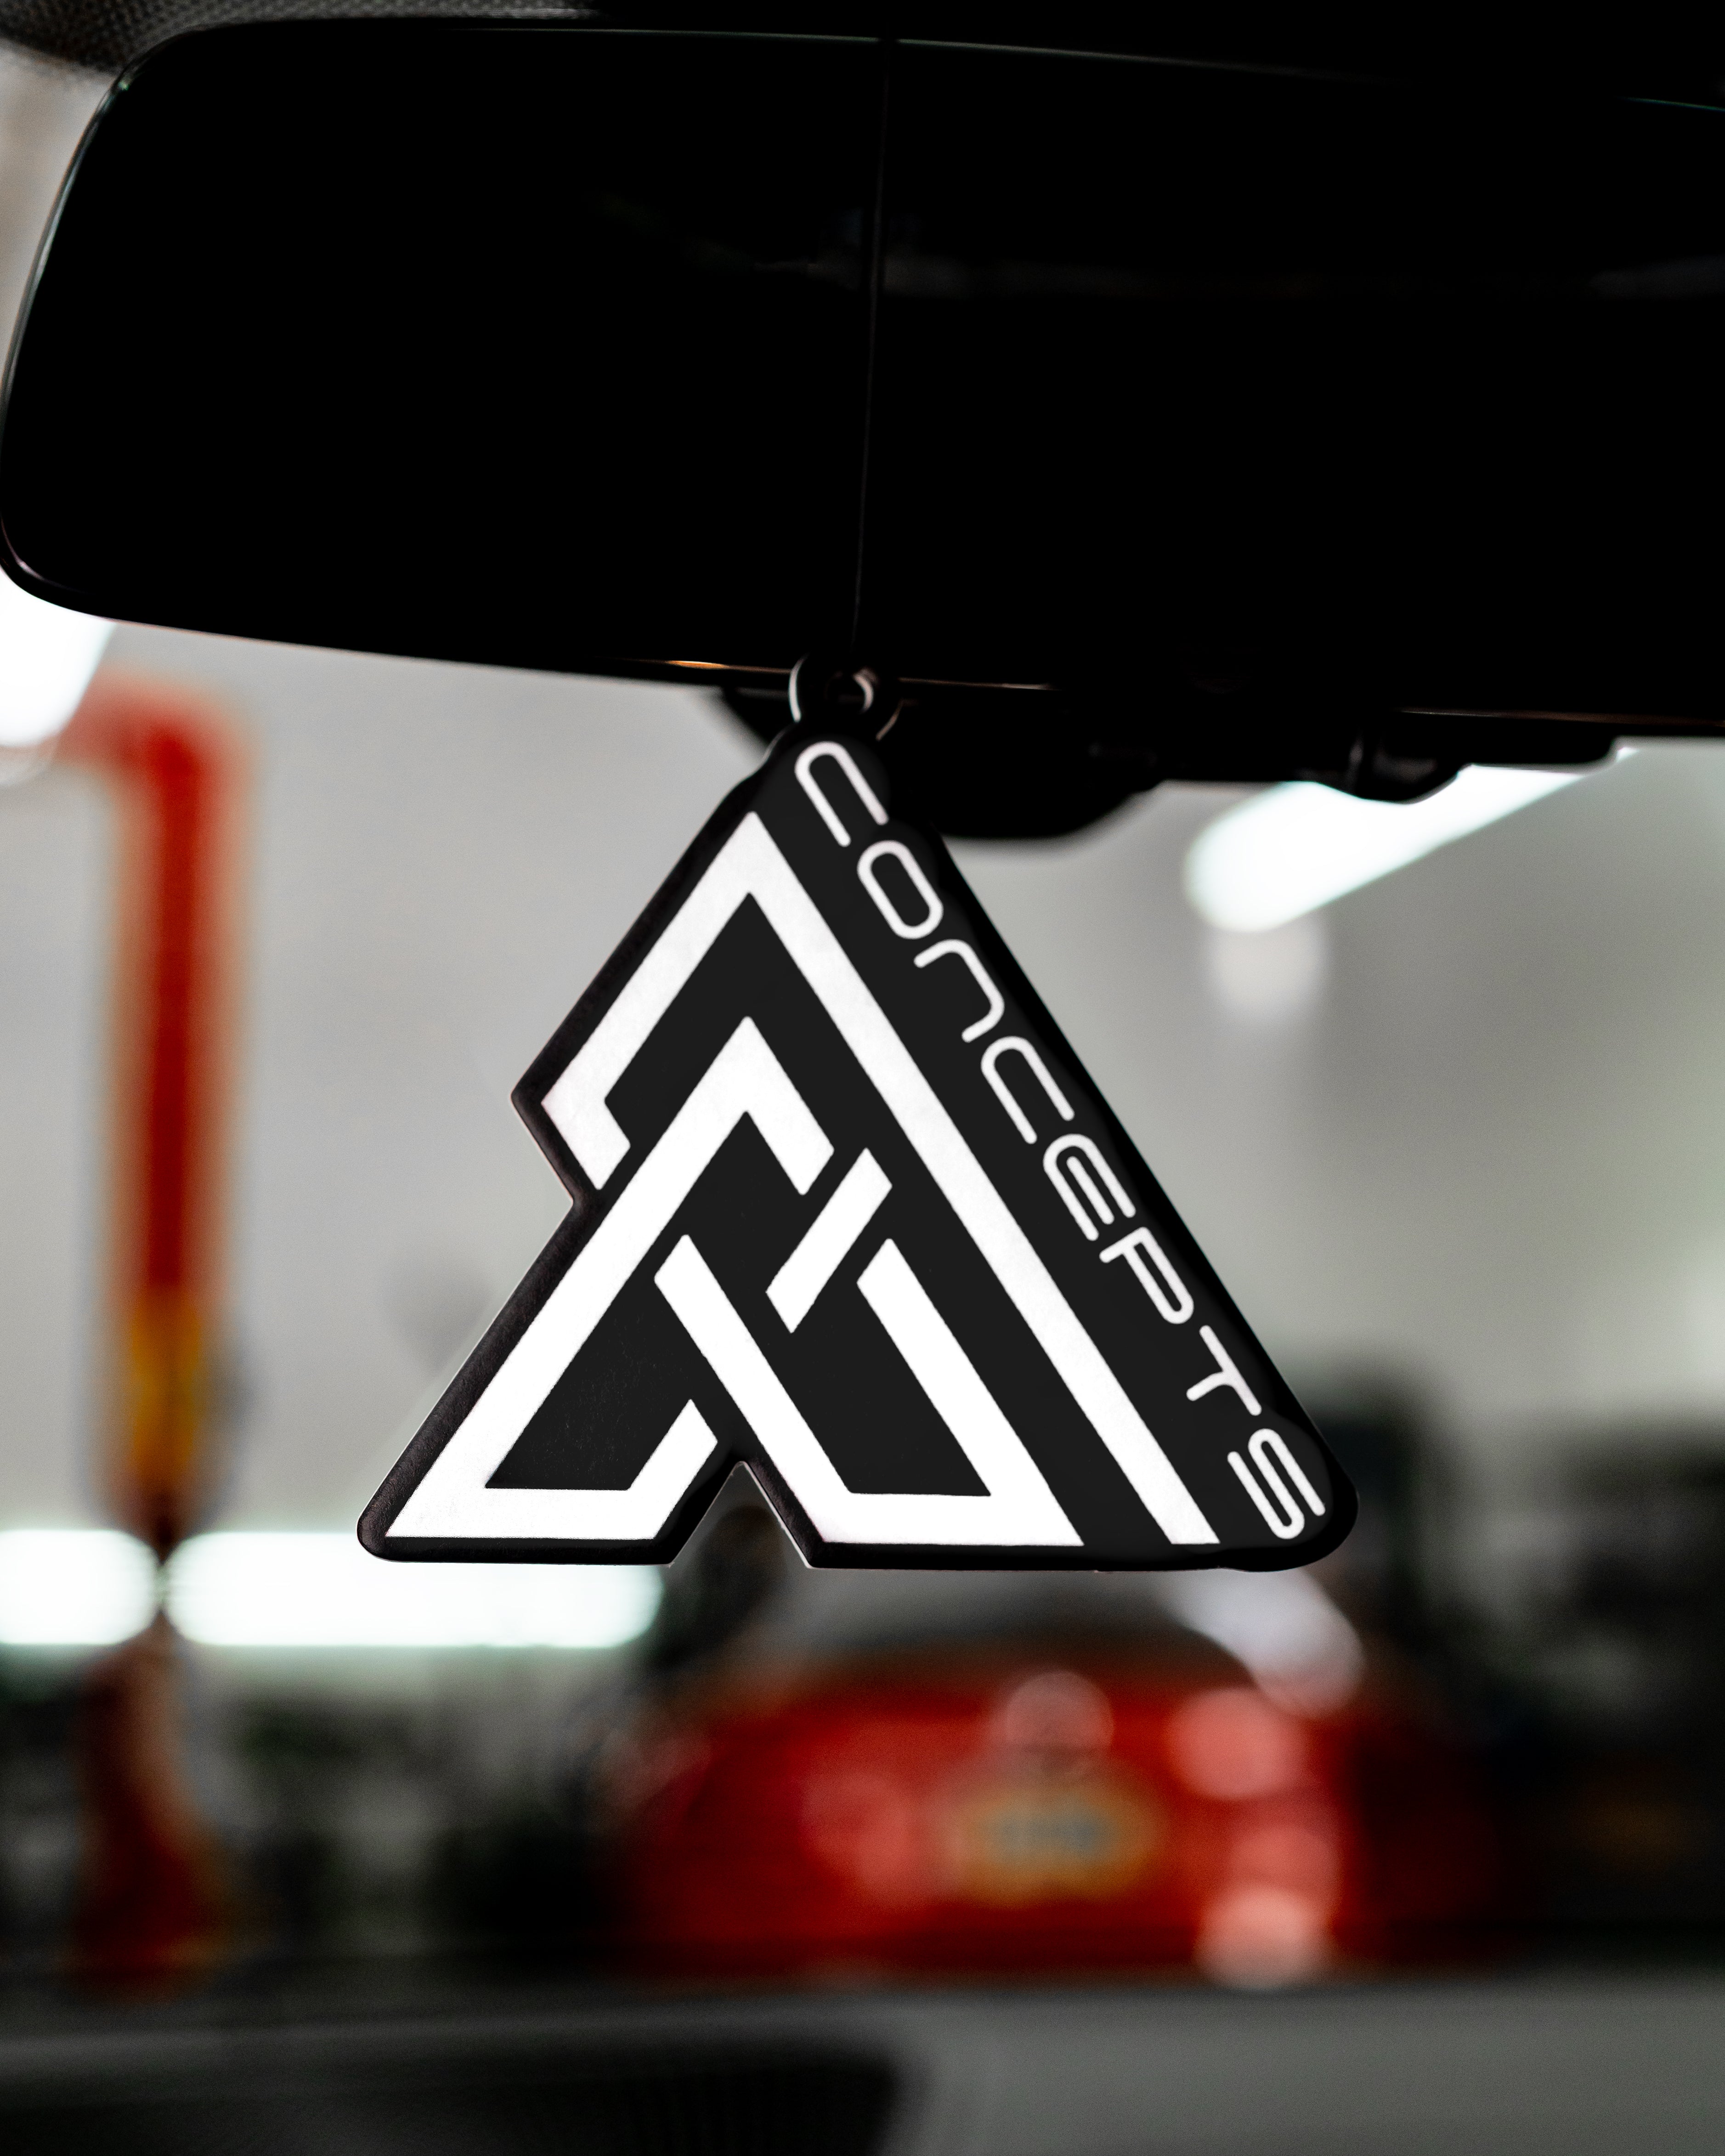 AA Concepts Co Air Freshener